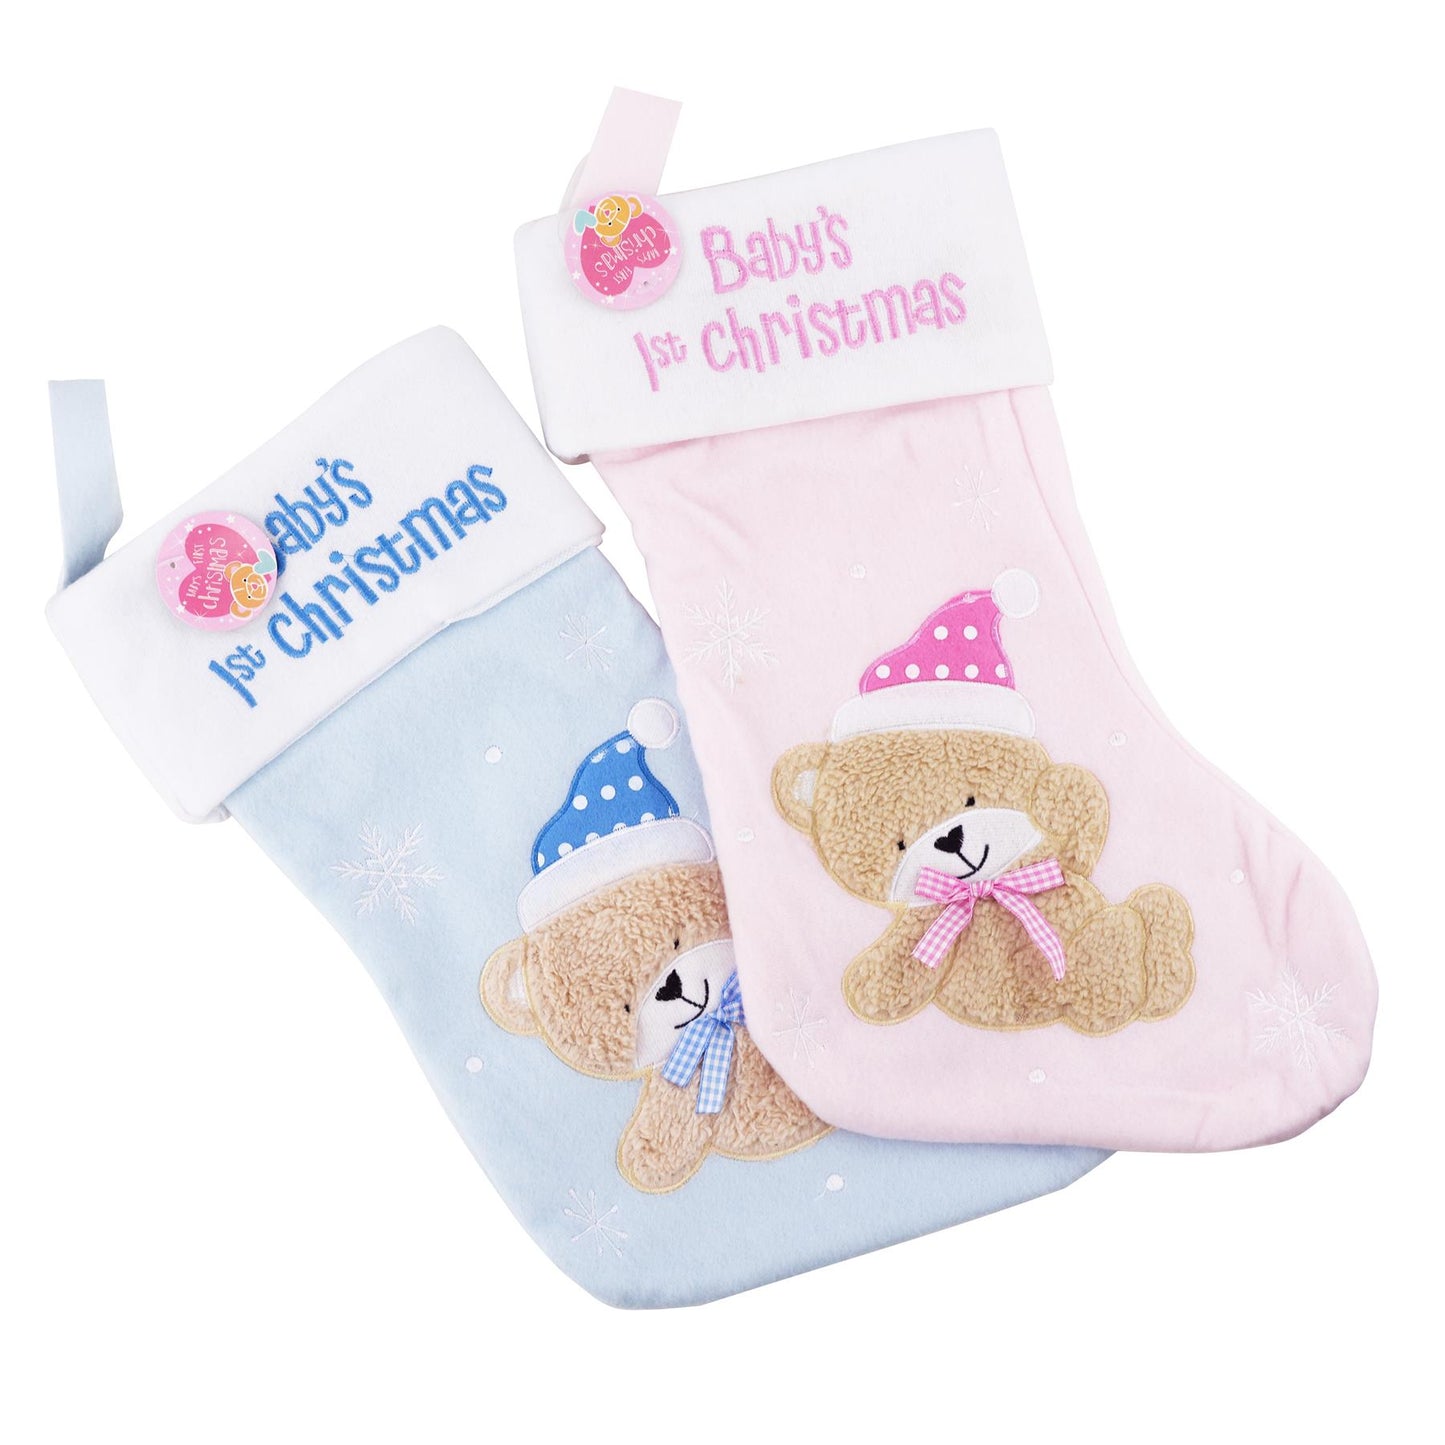 Set of 2 Baby's 1st Christmas Stockings by The Magic Toy Shop - UKBuyZone